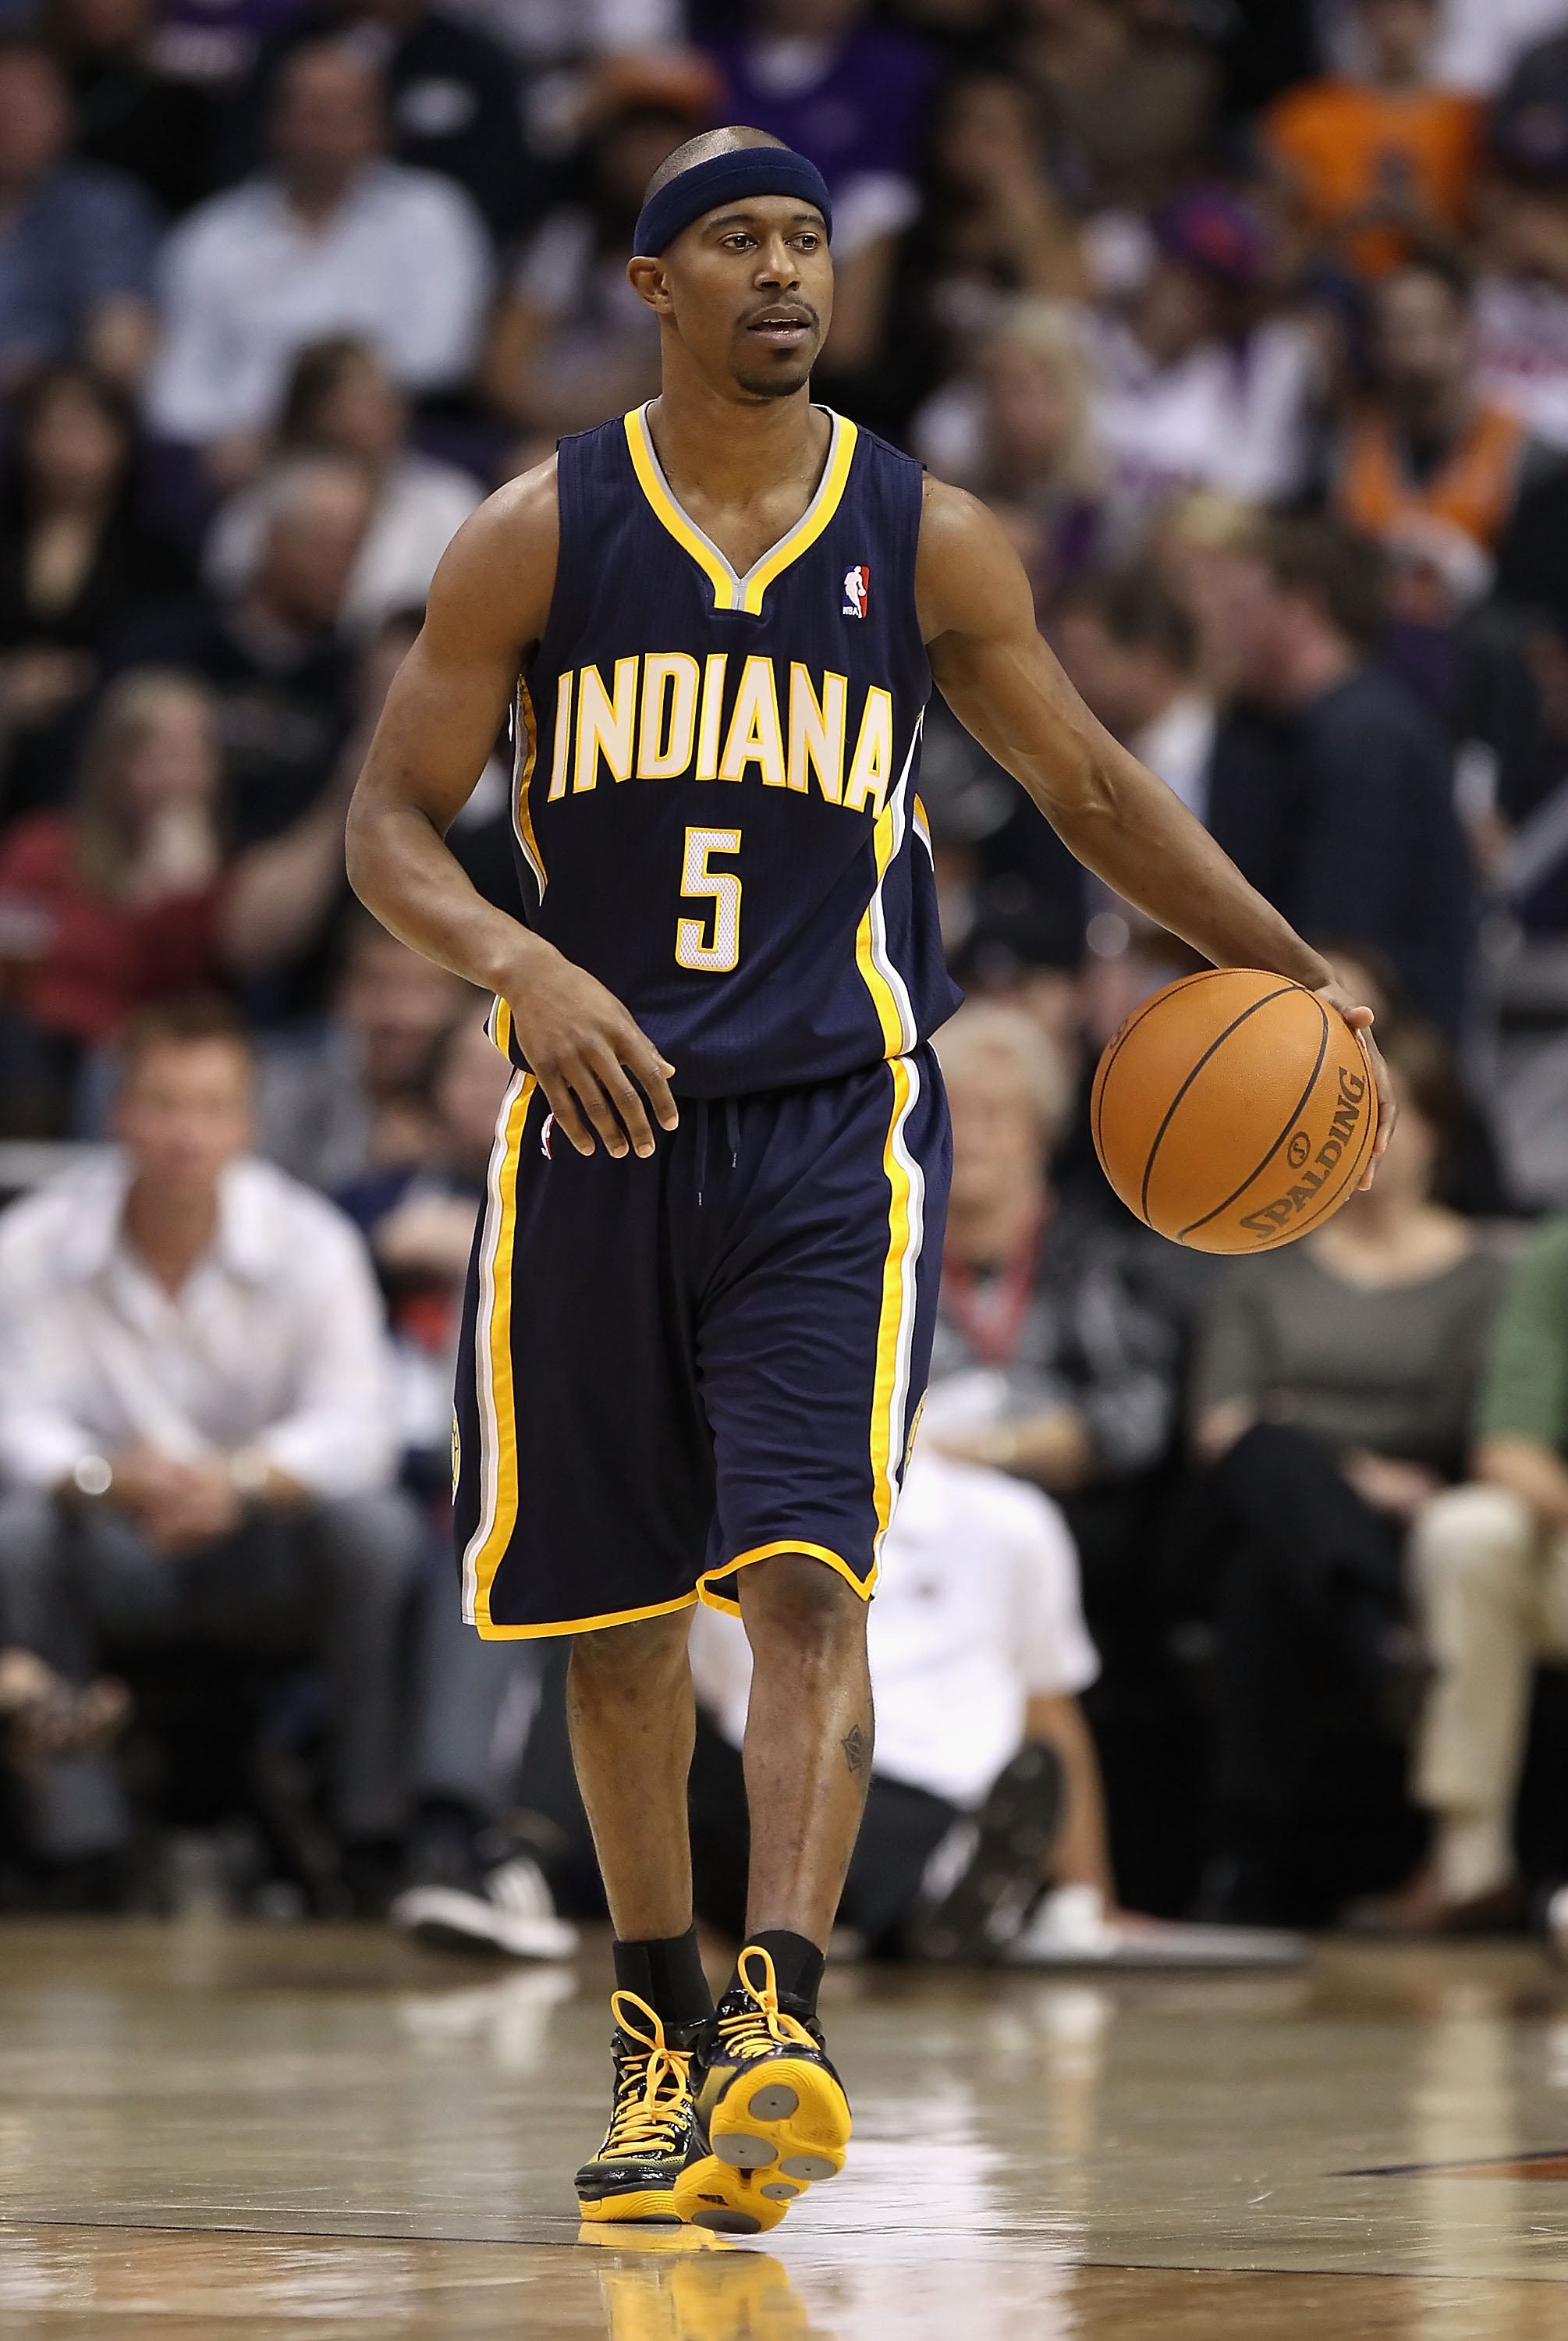 PHOENIX - DECEMBER 03:  T.J. Ford #5 of the Indiana Pacers handles the ball during the NBA game against the Phoenix Suns at US Airways Center on December 3, 2010 in Phoenix, Arizona.  The Suns defeated the Pacers 105-97.  NOTE TO USER: User expressly ackn